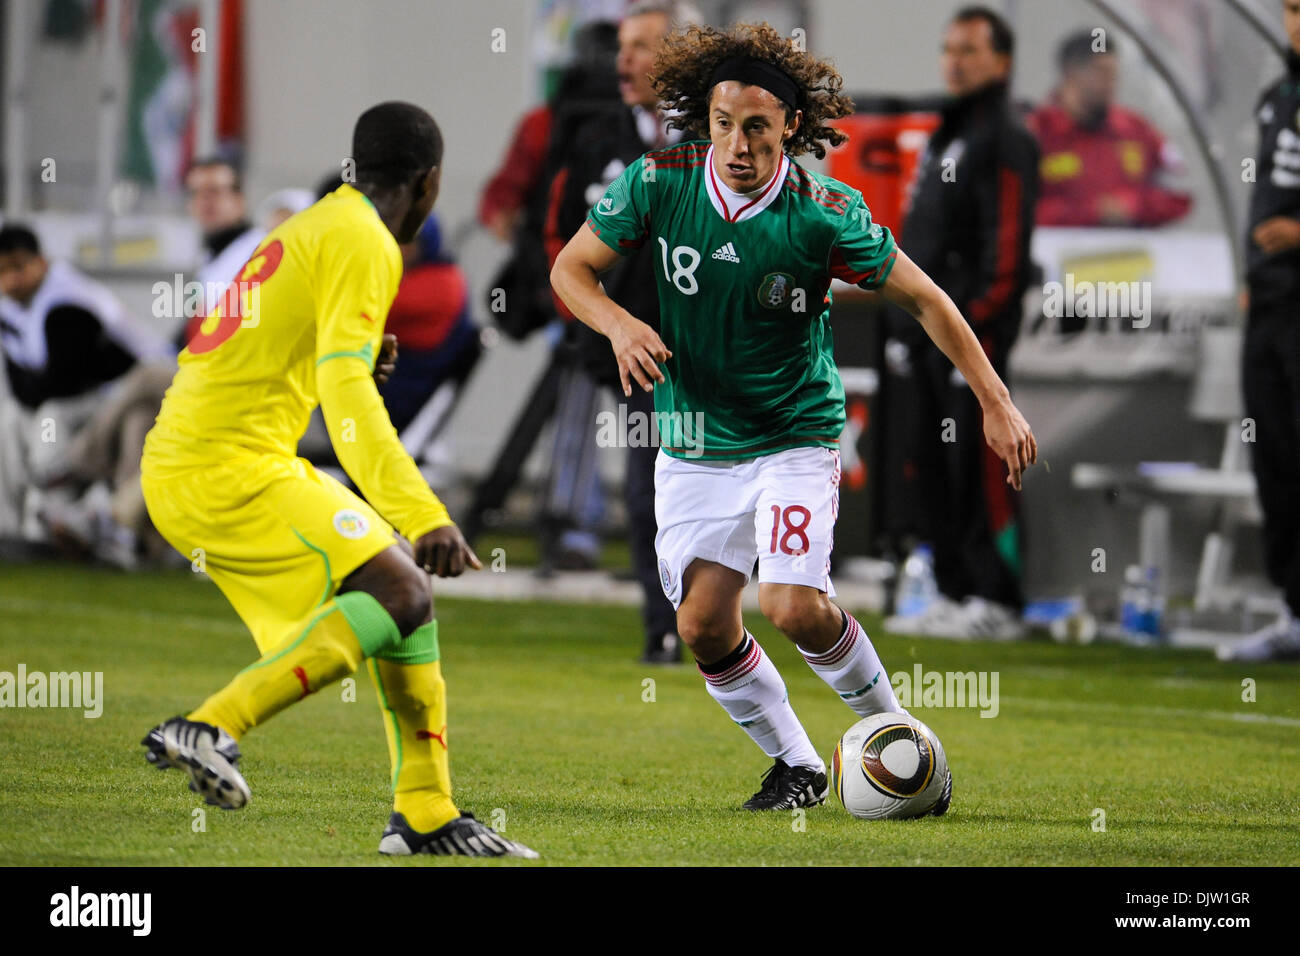 Mexico midfielder Andres Guardado dribbles the ball up field during the international friendly match between Mexico and Senegal at Soldier Field, Chicago, IL. (Credit Image: © John Rowland/Southcreek Global/ZUMApress.com) Stock Photo